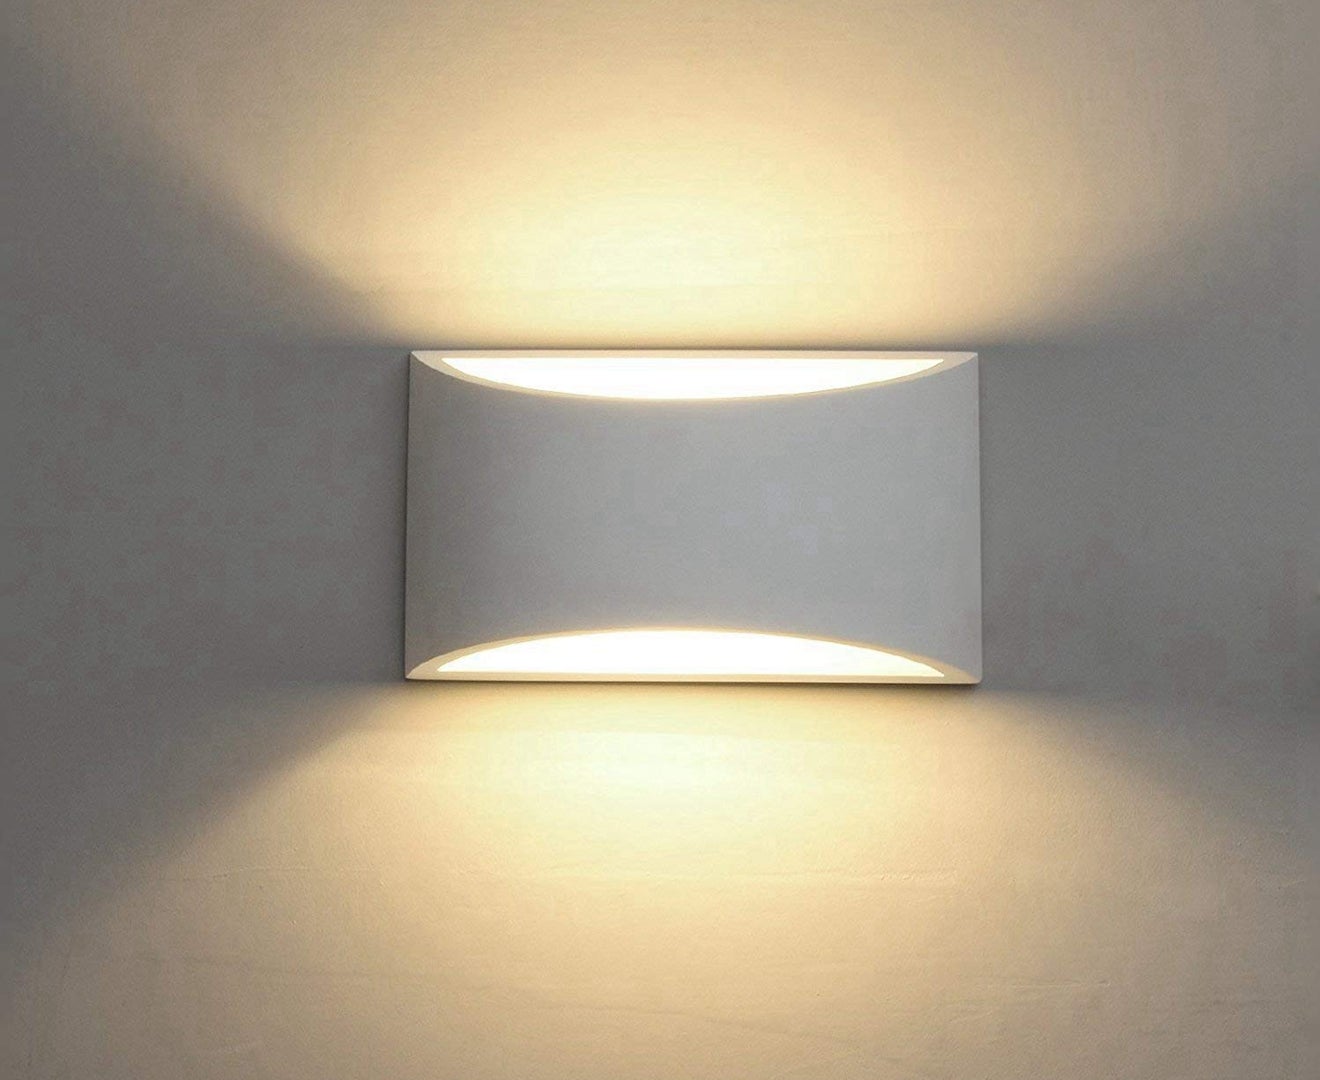 Modern LED Wall Sconce Lighting Fixture Lamps 7W Warm White 2700K Up and Down Indoor Plaster Wall Lamps(with G9 Bulbs Not Dimmable)-Warm White Light